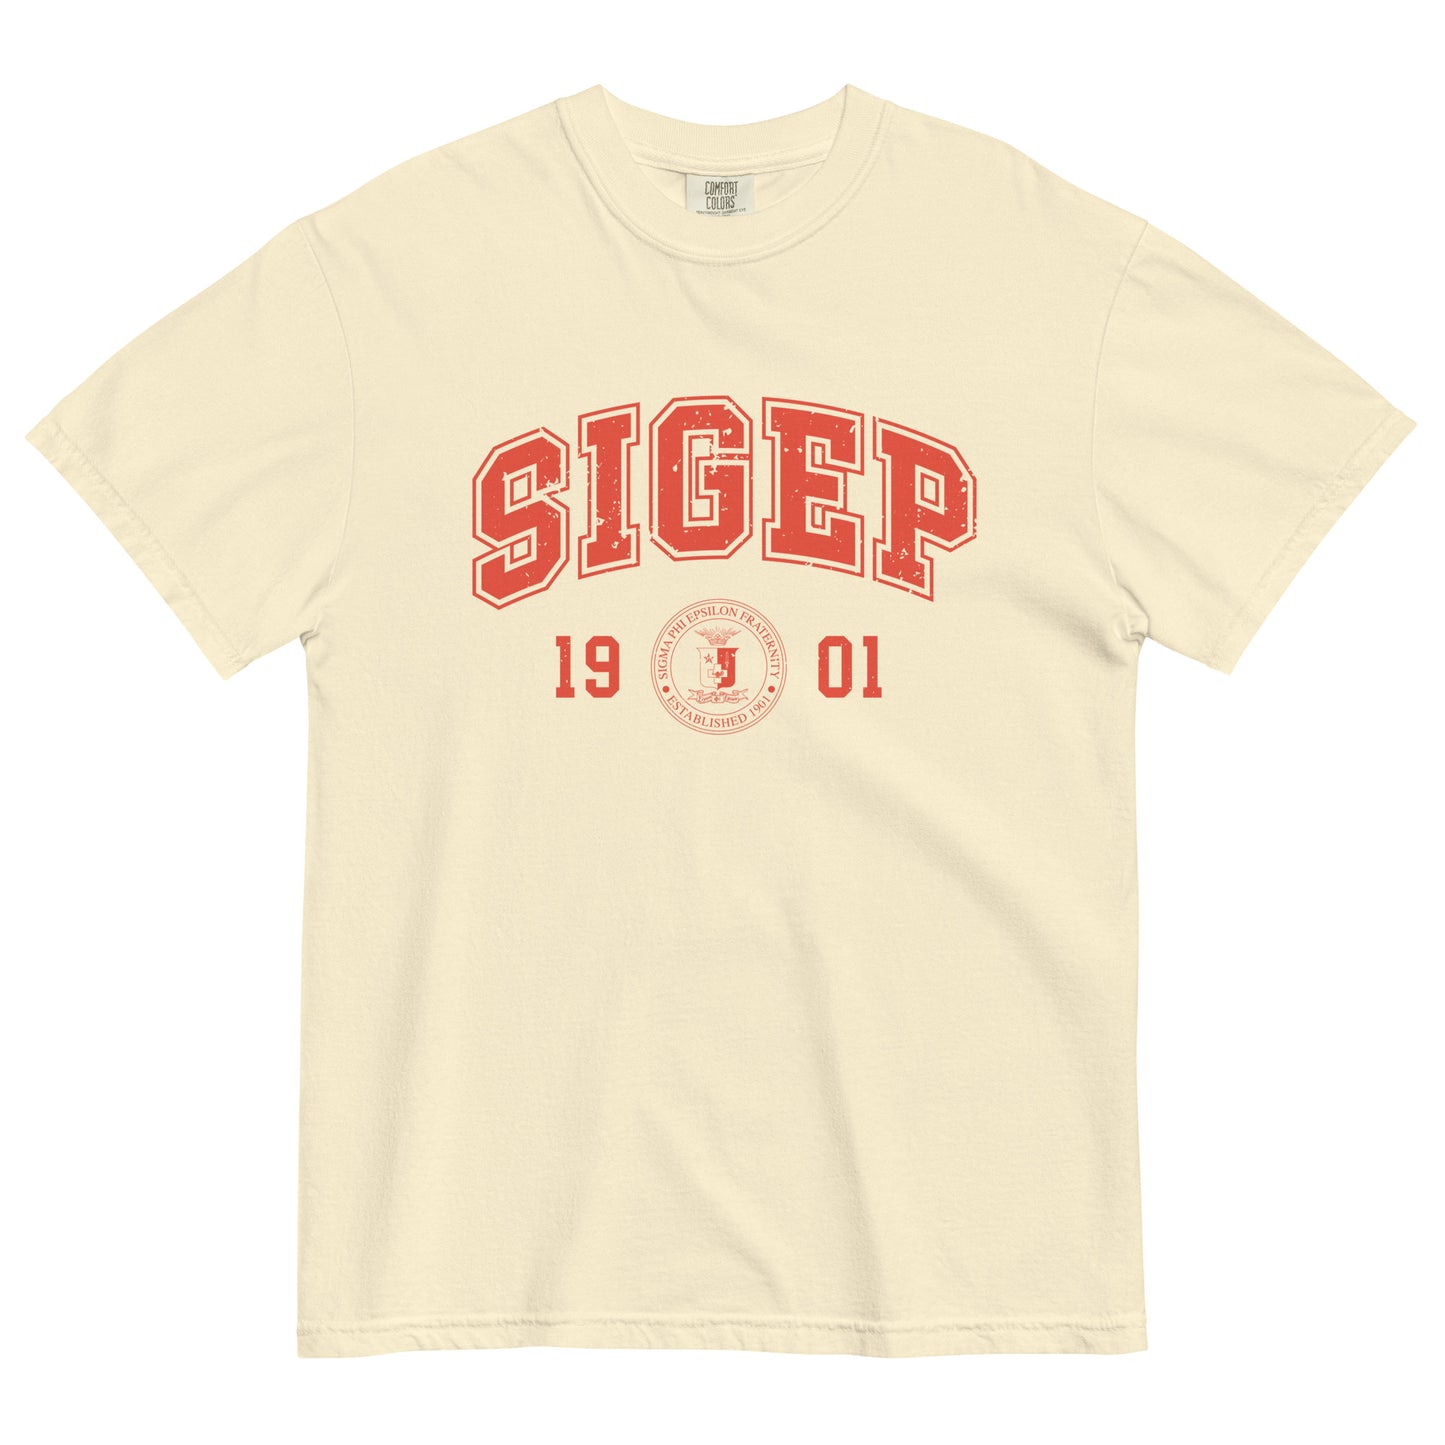 SigEp Old School T-Shirt